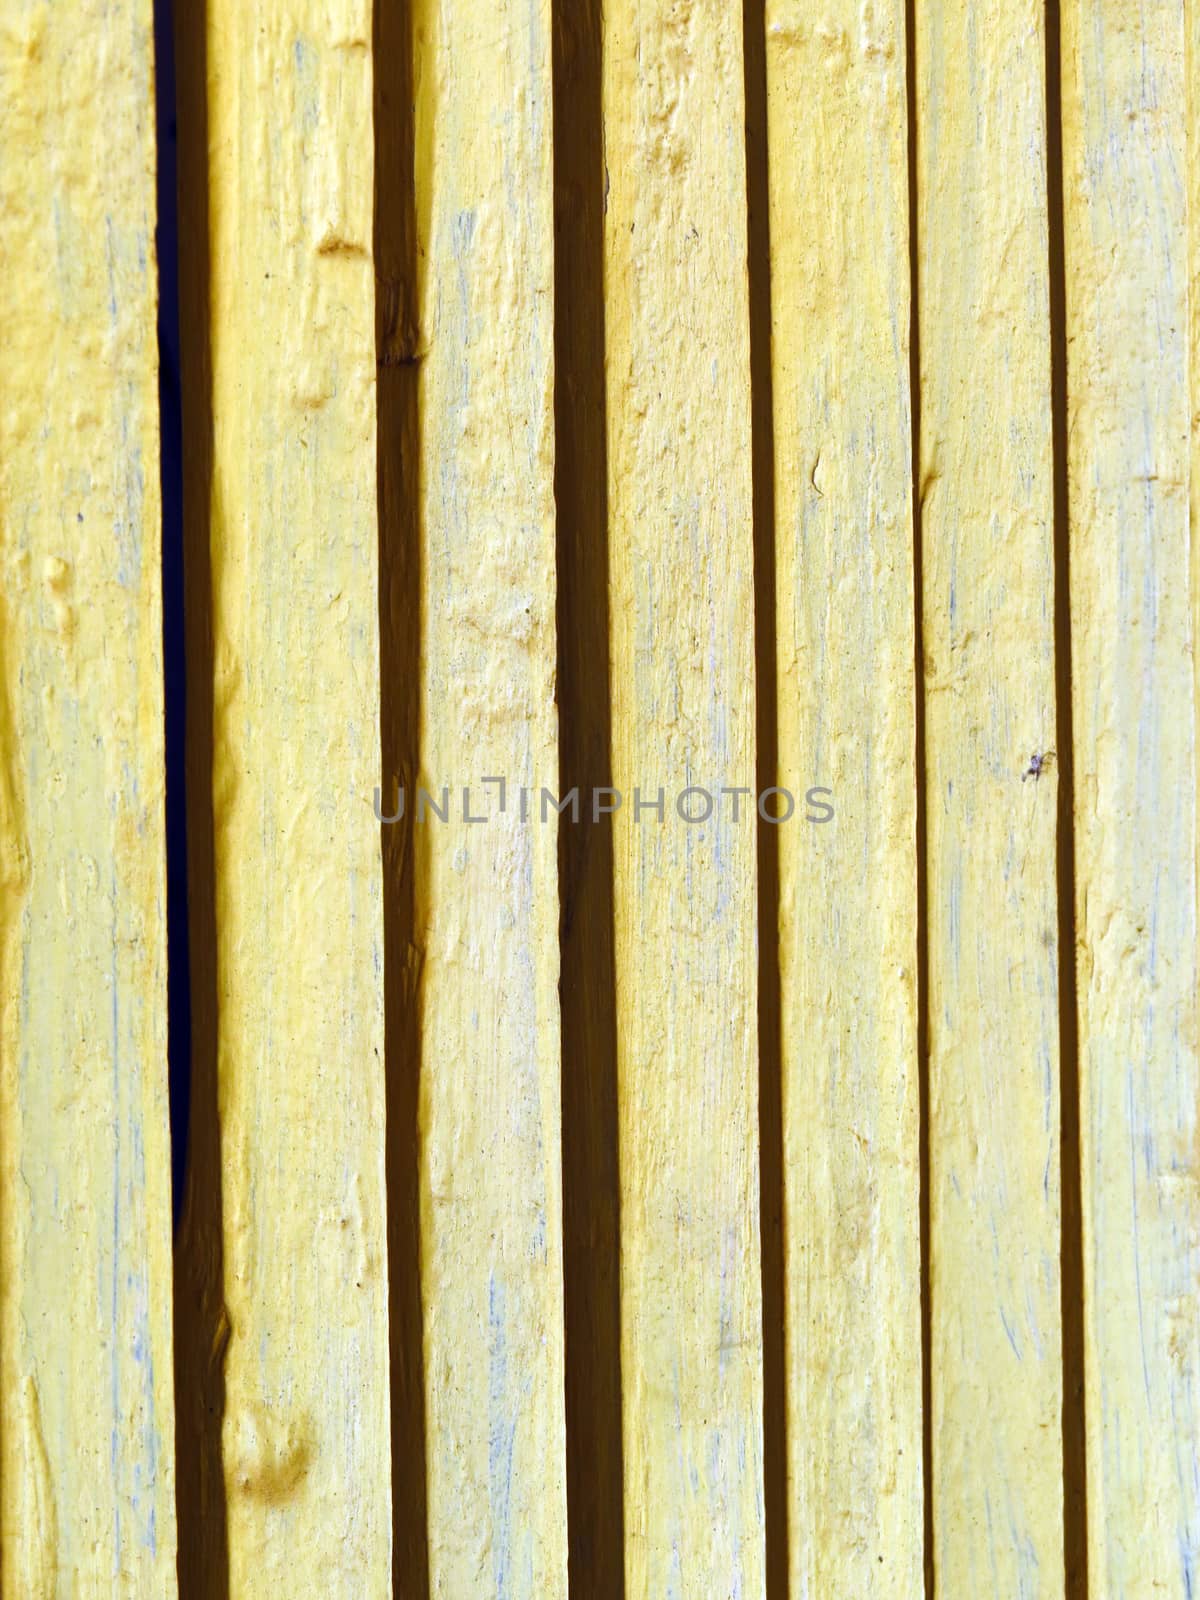 A background of a window grills made of wooden planks in an old Indian village house.                               